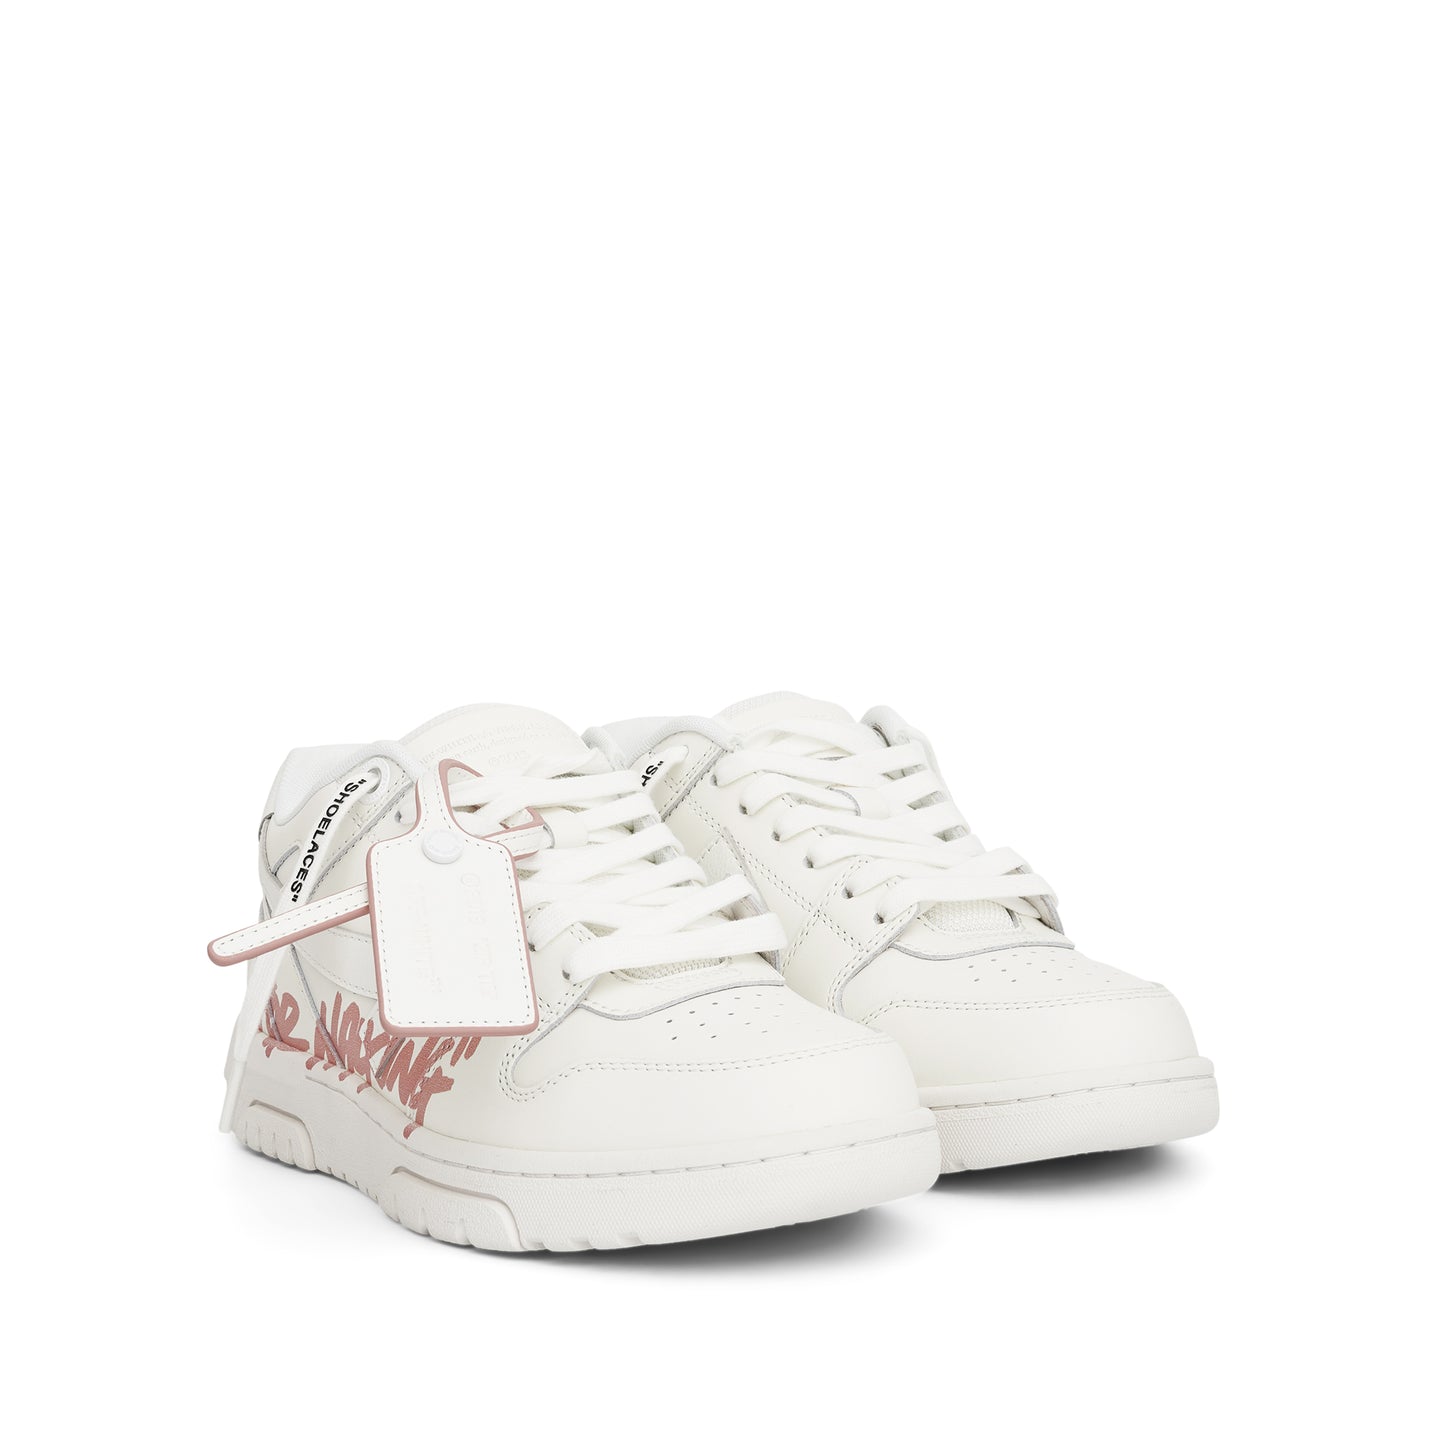 Out of Office "For WALKING" Leather Sneaker in White/Pink